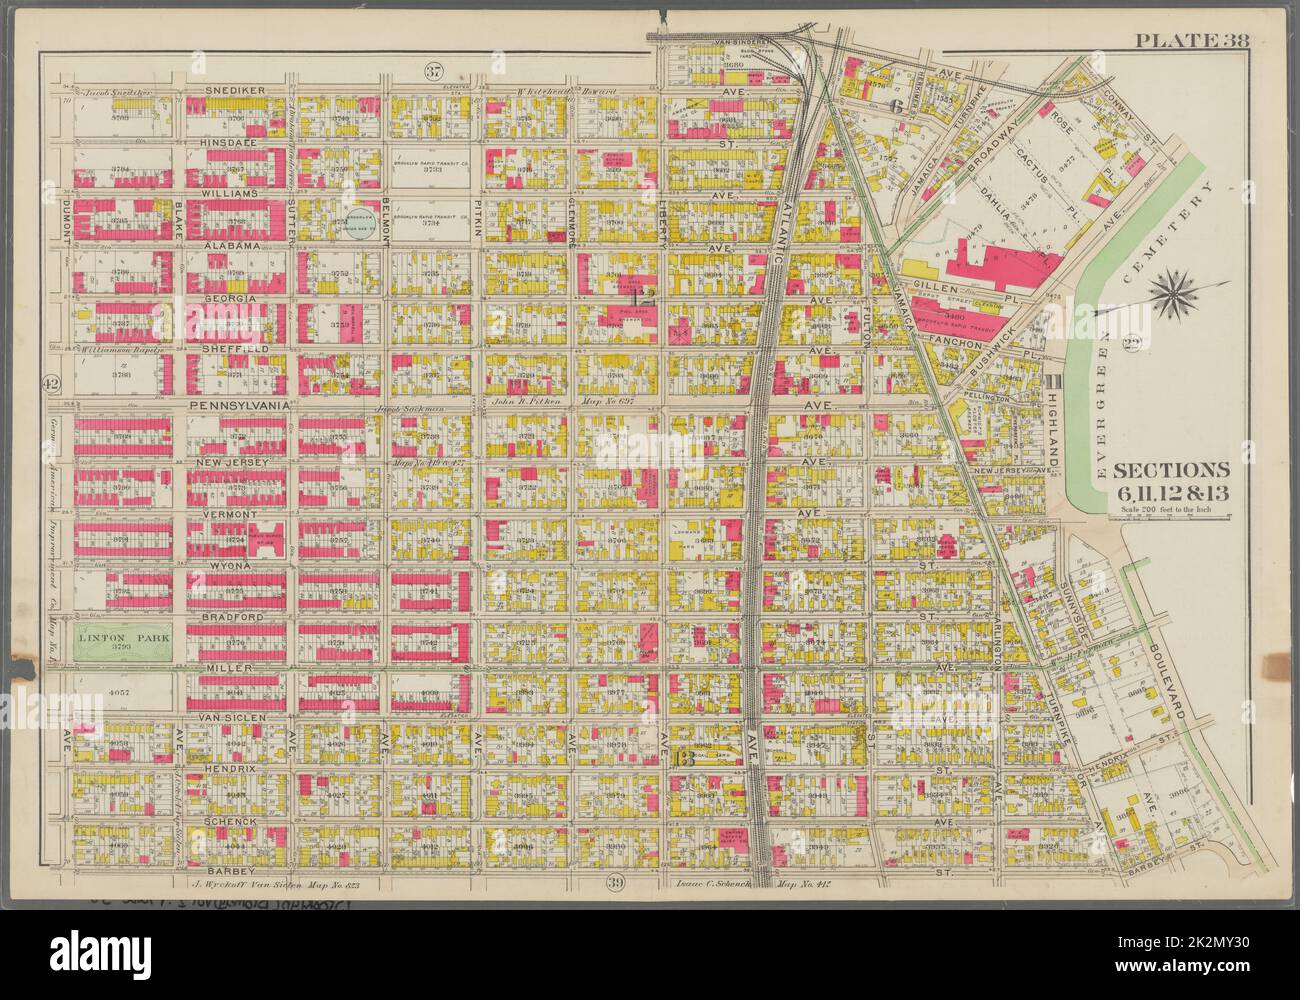 Bromley, George Washington. still image. Maps, Atlases, land surveys. 1908. Lionel Pincus and Princess Firyal Map Division. Brooklyn (New York, N.Y.) , Maps Plate 38: Bounded by Snediker Avenue, Liberty Avenue, Van Sindren Avenue, Conway Street, Bushwick Avenue, (Evergreen Cemetery) Highland Boulevard, Barbey Street and Dumont Avenue Plate 38 Stock Photo